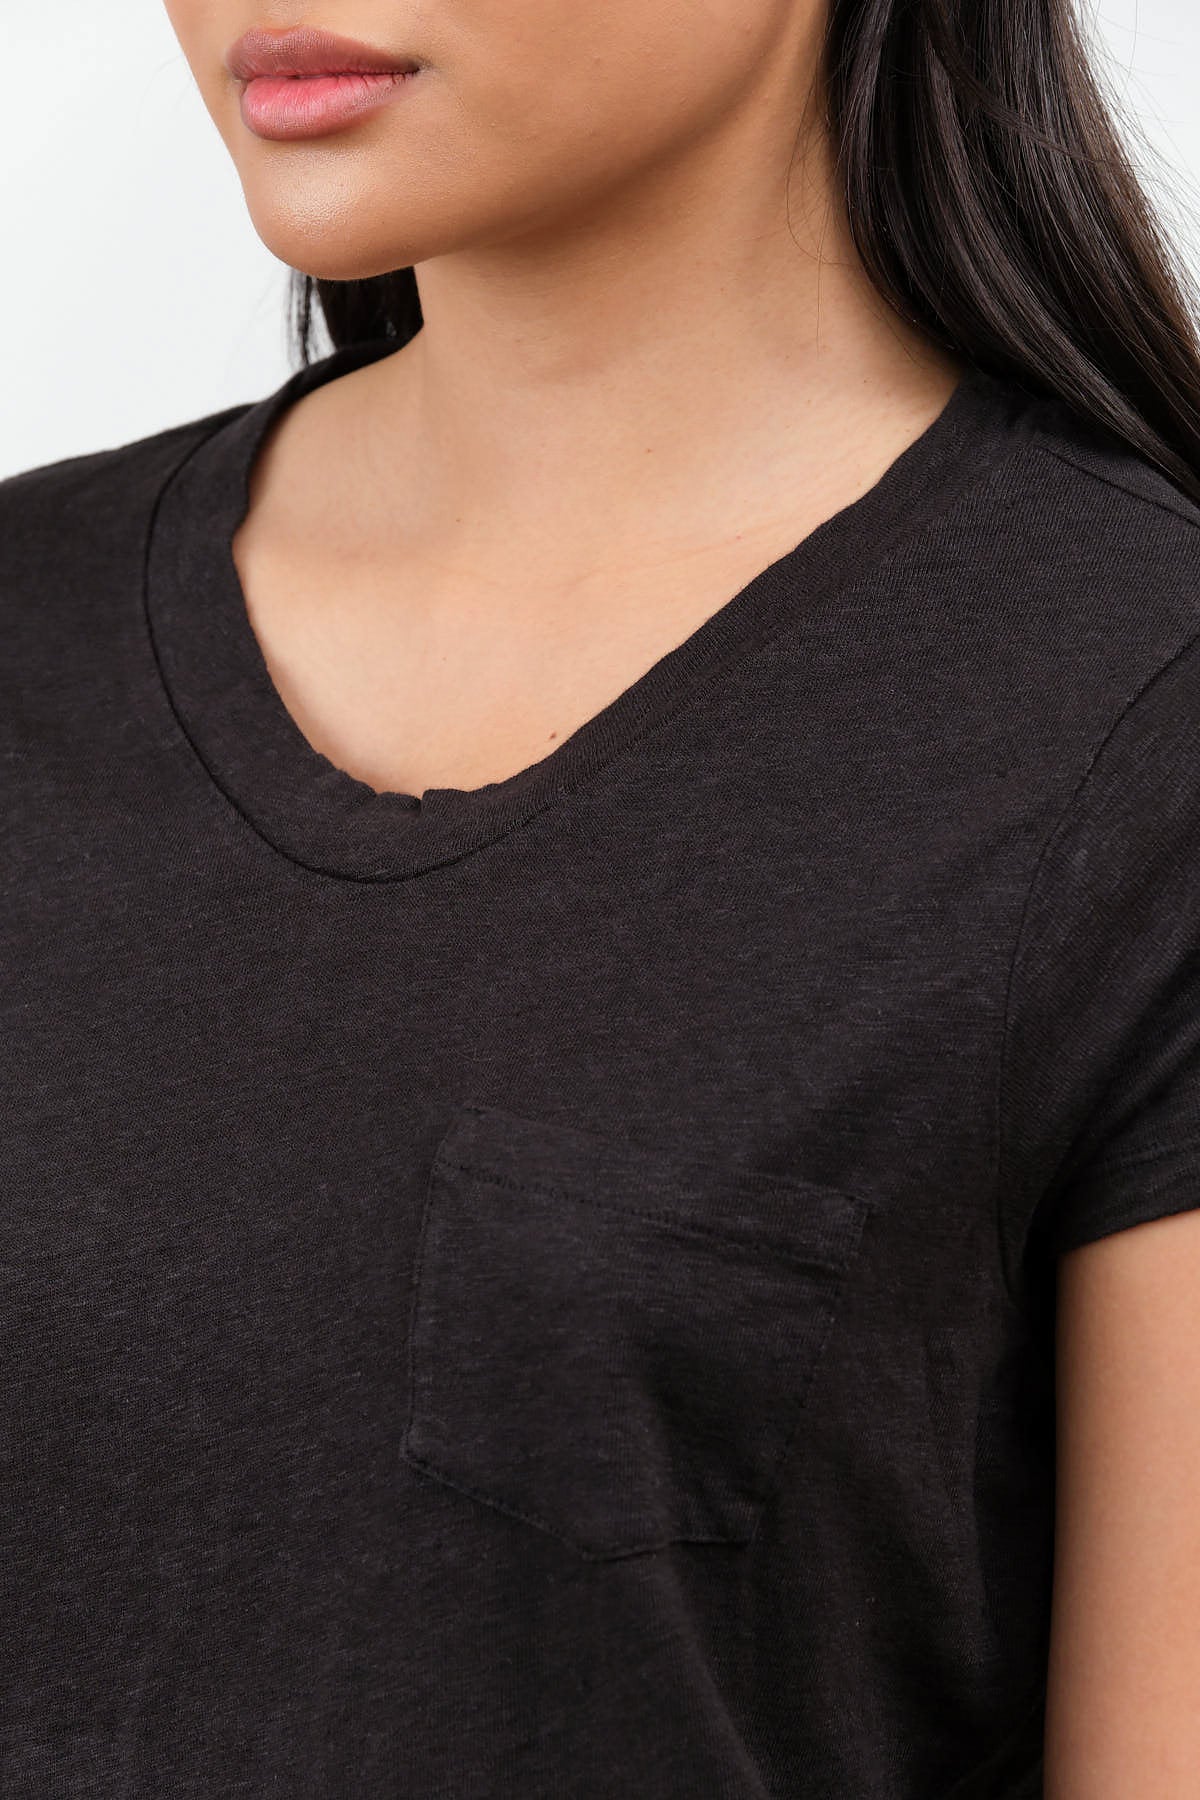 Collar view of Sweetness V-Neck Tee in Black